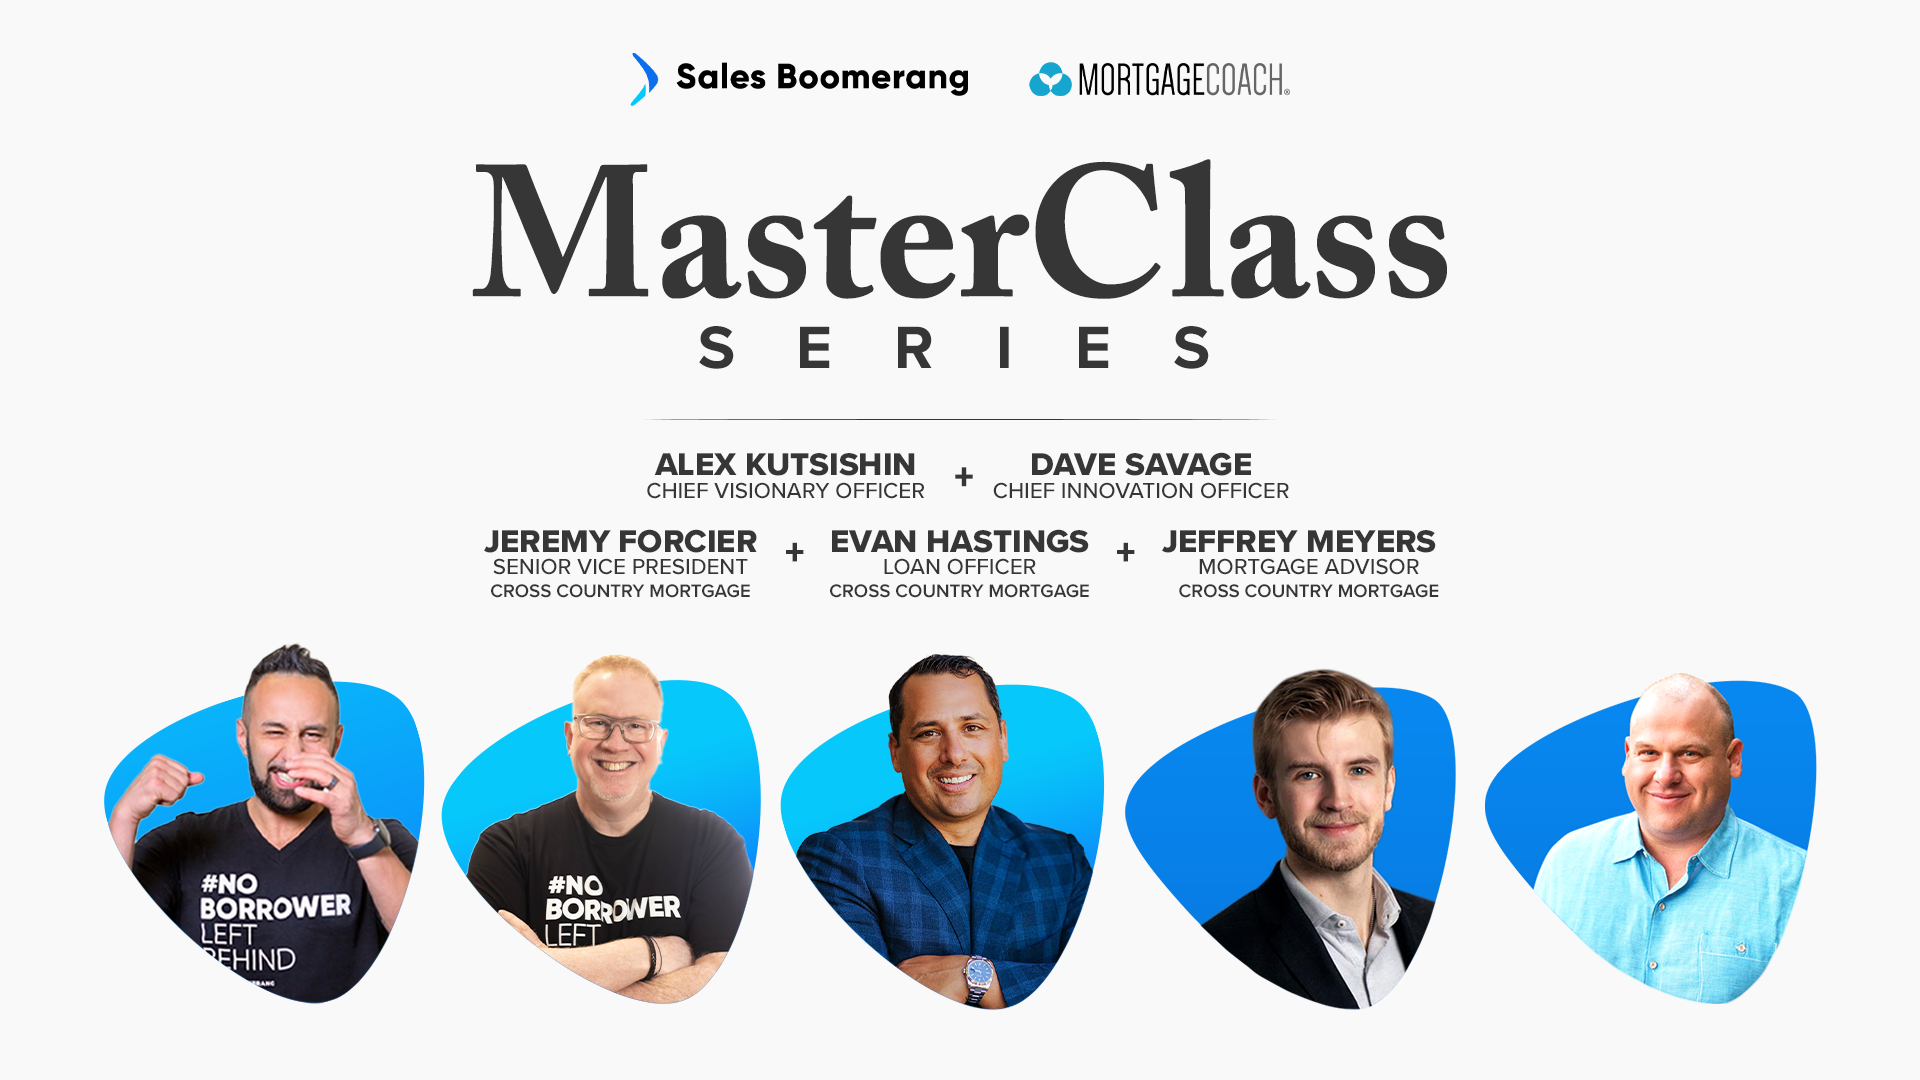 MasterClass #3: How to Add 1-2 Qualified Loans per Month to each of your Originator’s Pipelines and 10X to the Lifetime Value for Your Customers